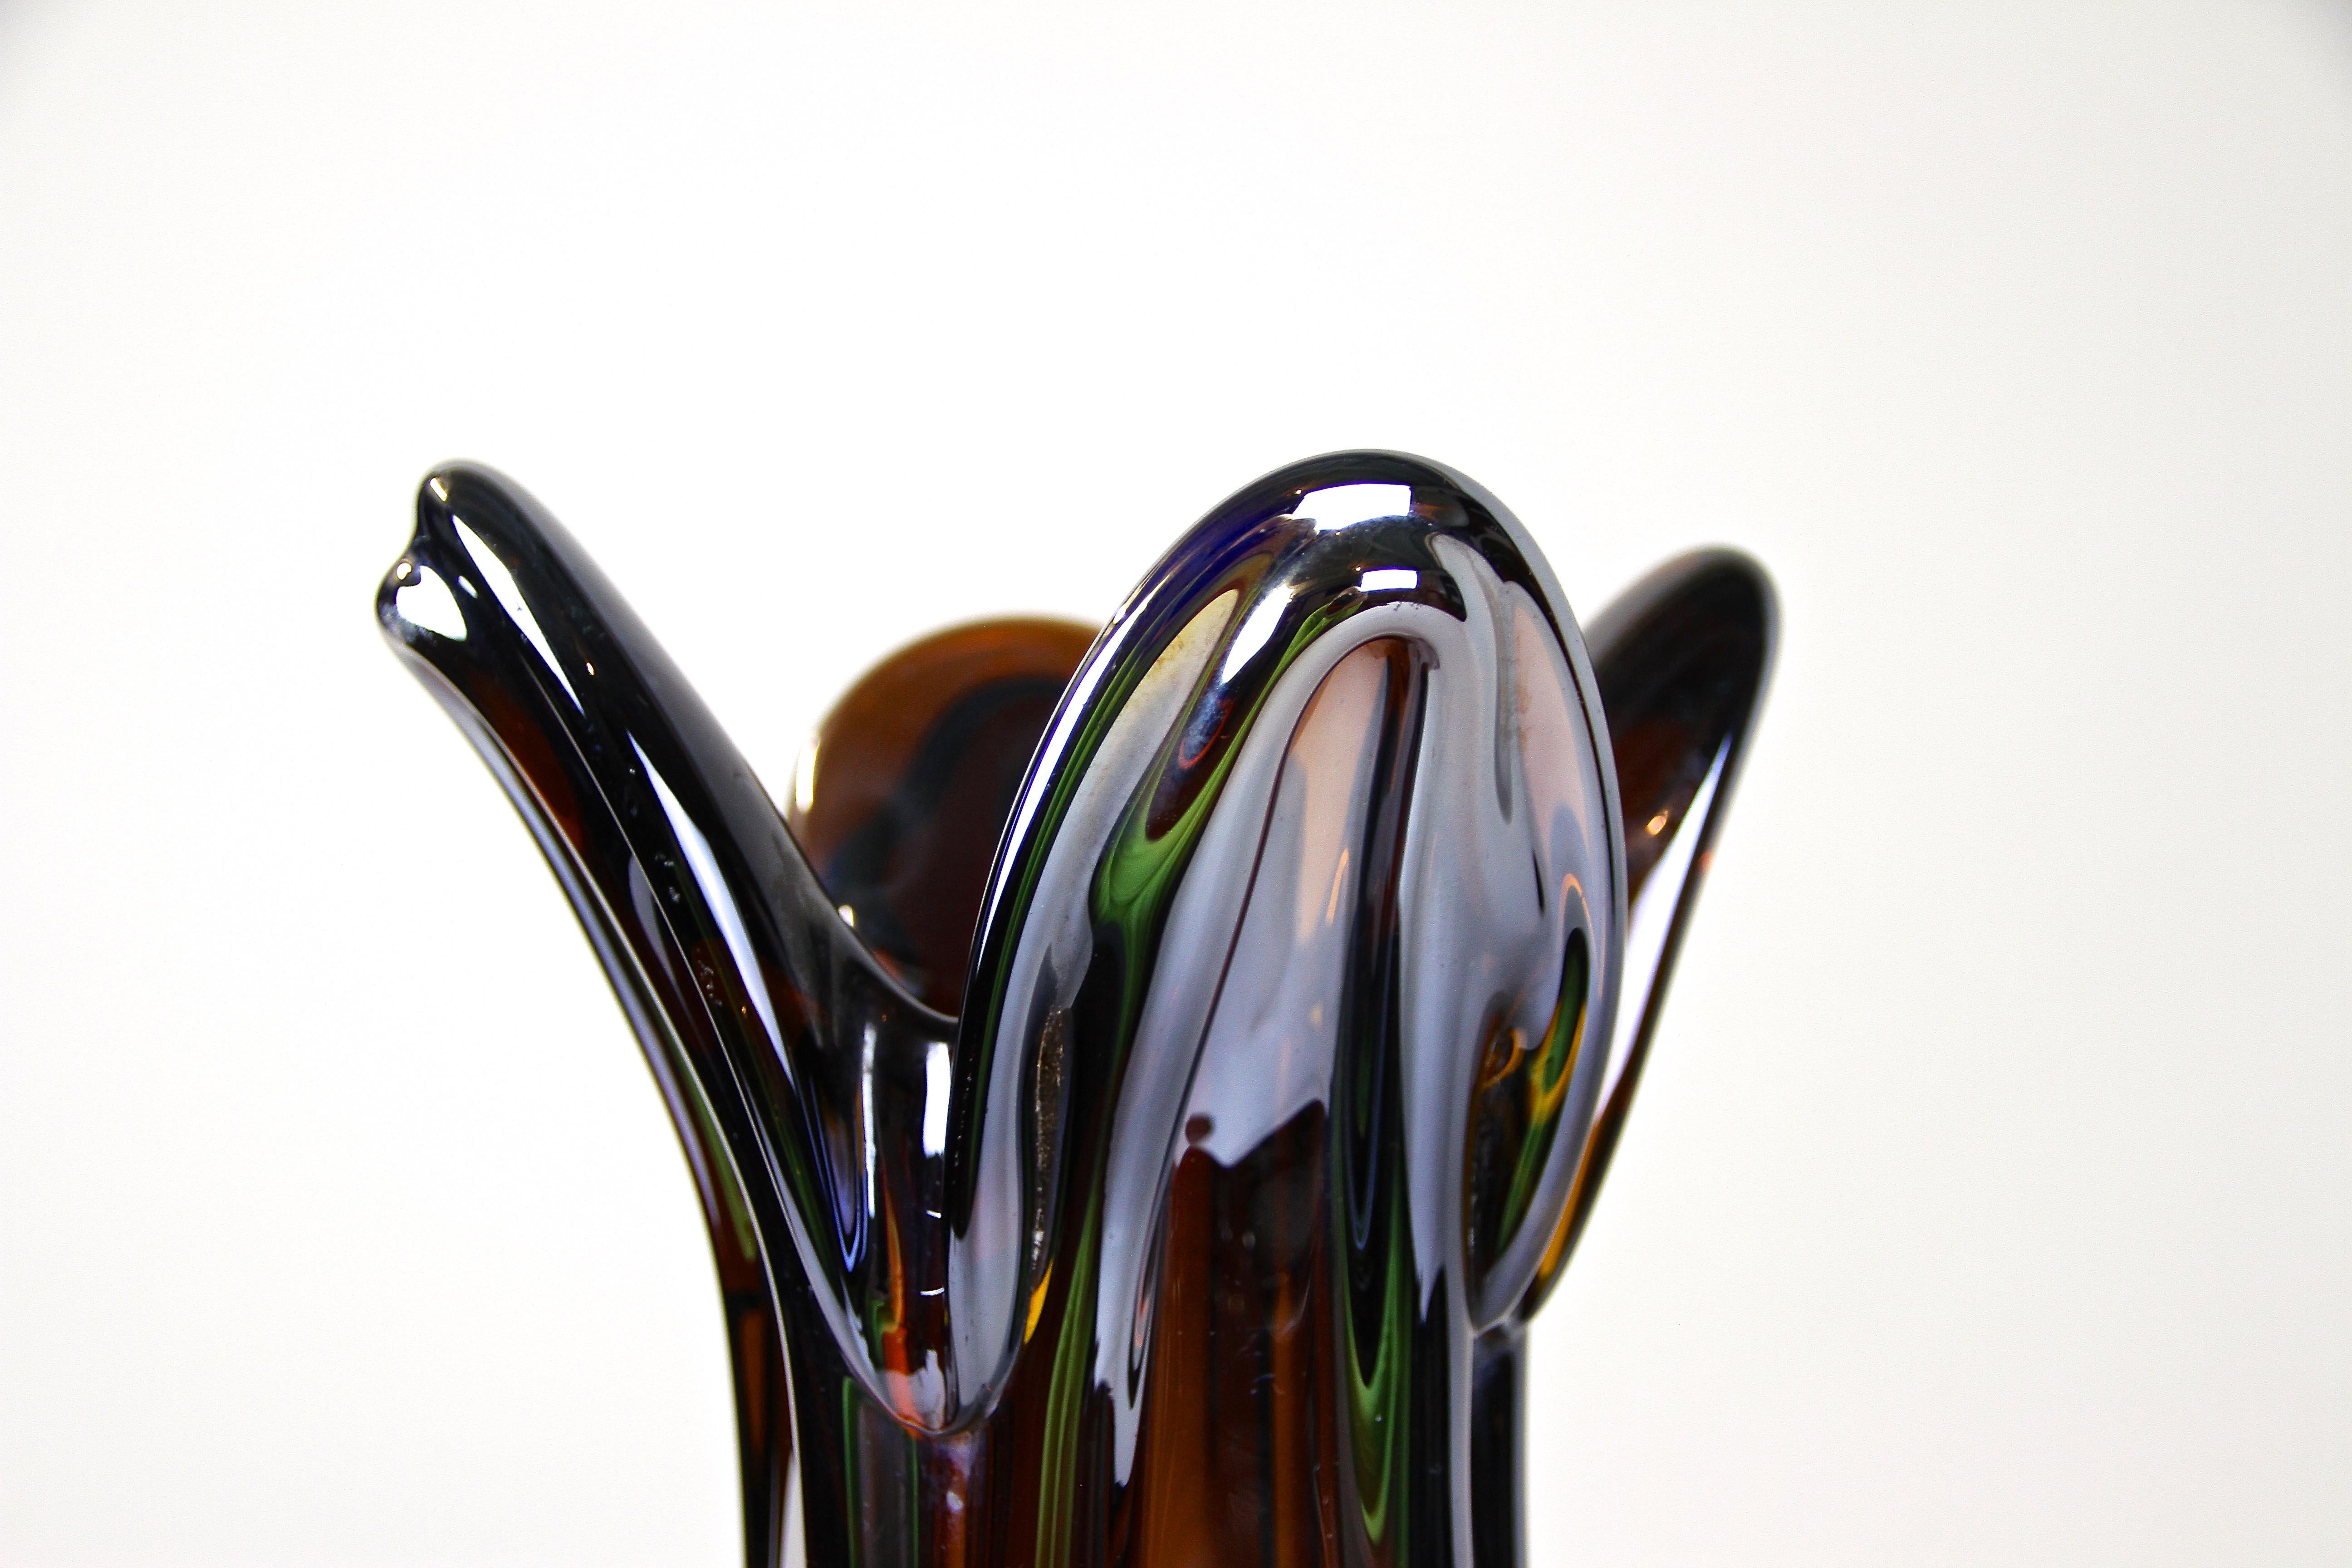 Mid-Century Modern Iridiscent Murano Glass Vase Amber Colored with Chrome Effect, Italy circa 1970 For Sale